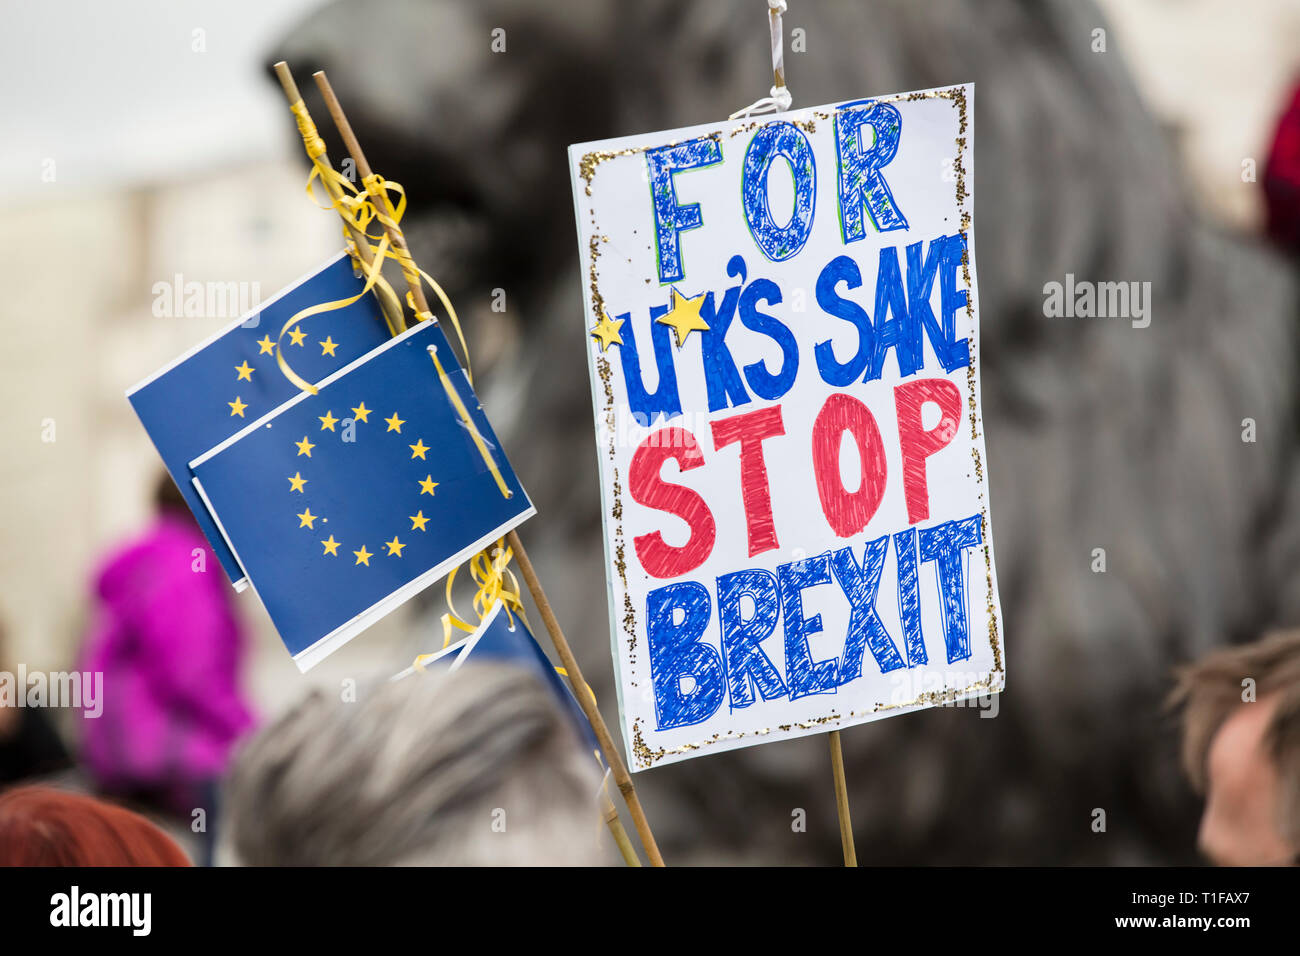 Stop Brexit banner at a political protest in London Stock Photo